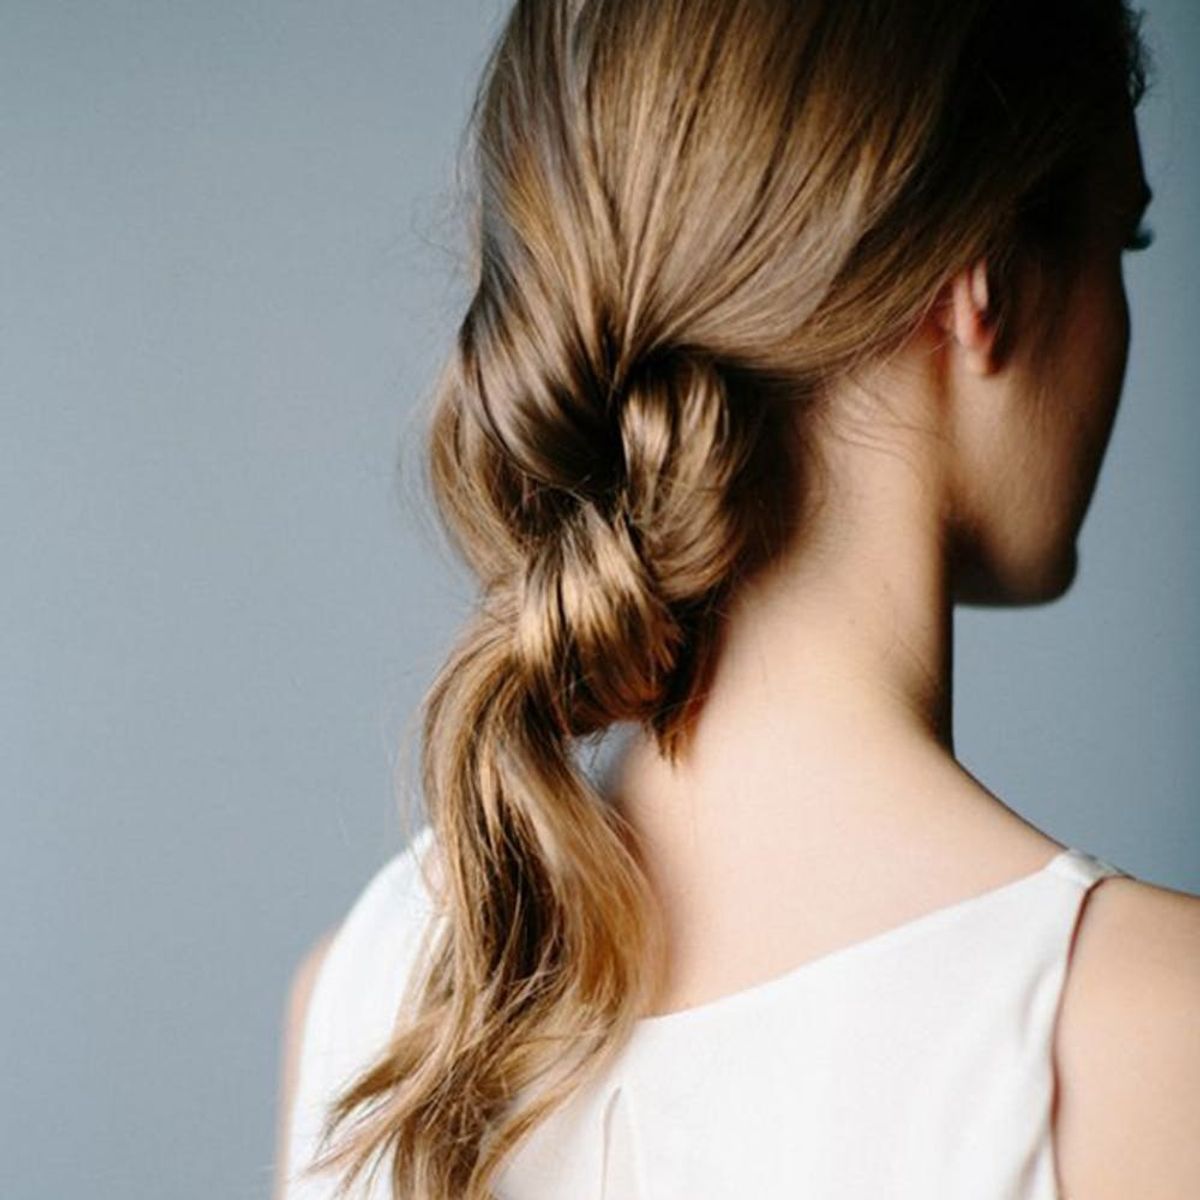 Banana Bun Hairstyles Are Here to Bring Out Your Inner French Girl